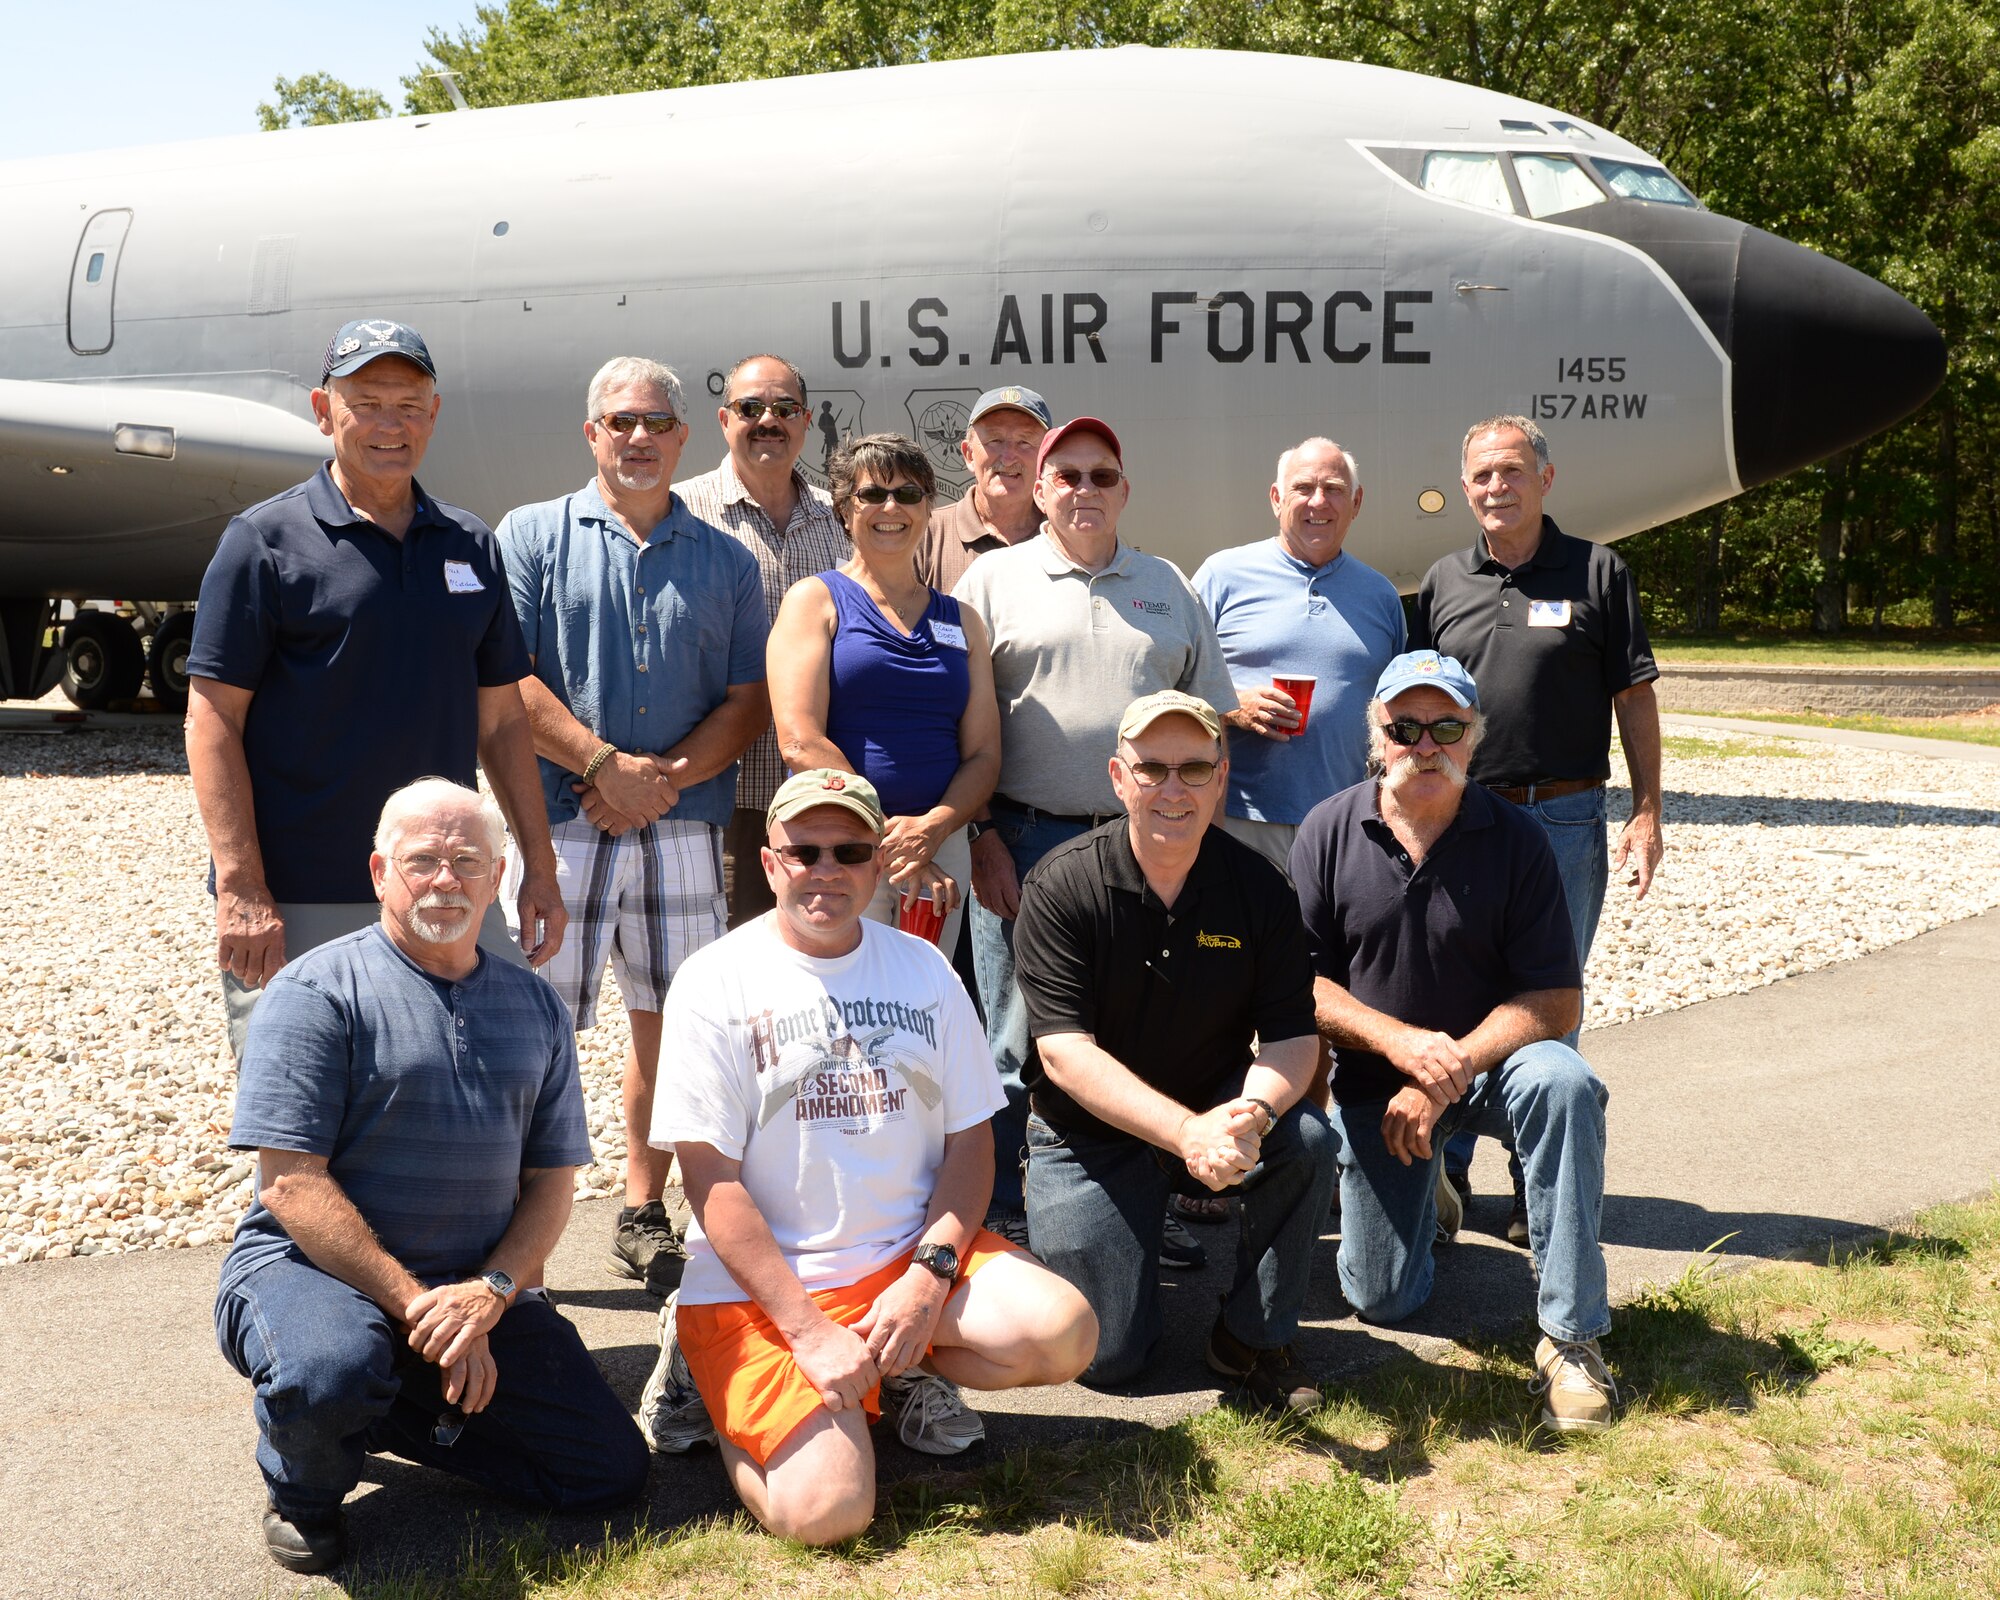 Former aircraft maintenance crew chiefs from the 157th Air Refueling Wing pose for a photograph in front of the KC-135 Stratotanker static display during the Annual Retiree Day on June 17, 2015 at Pease Air National Guard Base, N.H.  (U.S. Air National Guard photo by Staff Sgt. Curtis J. Lenz)